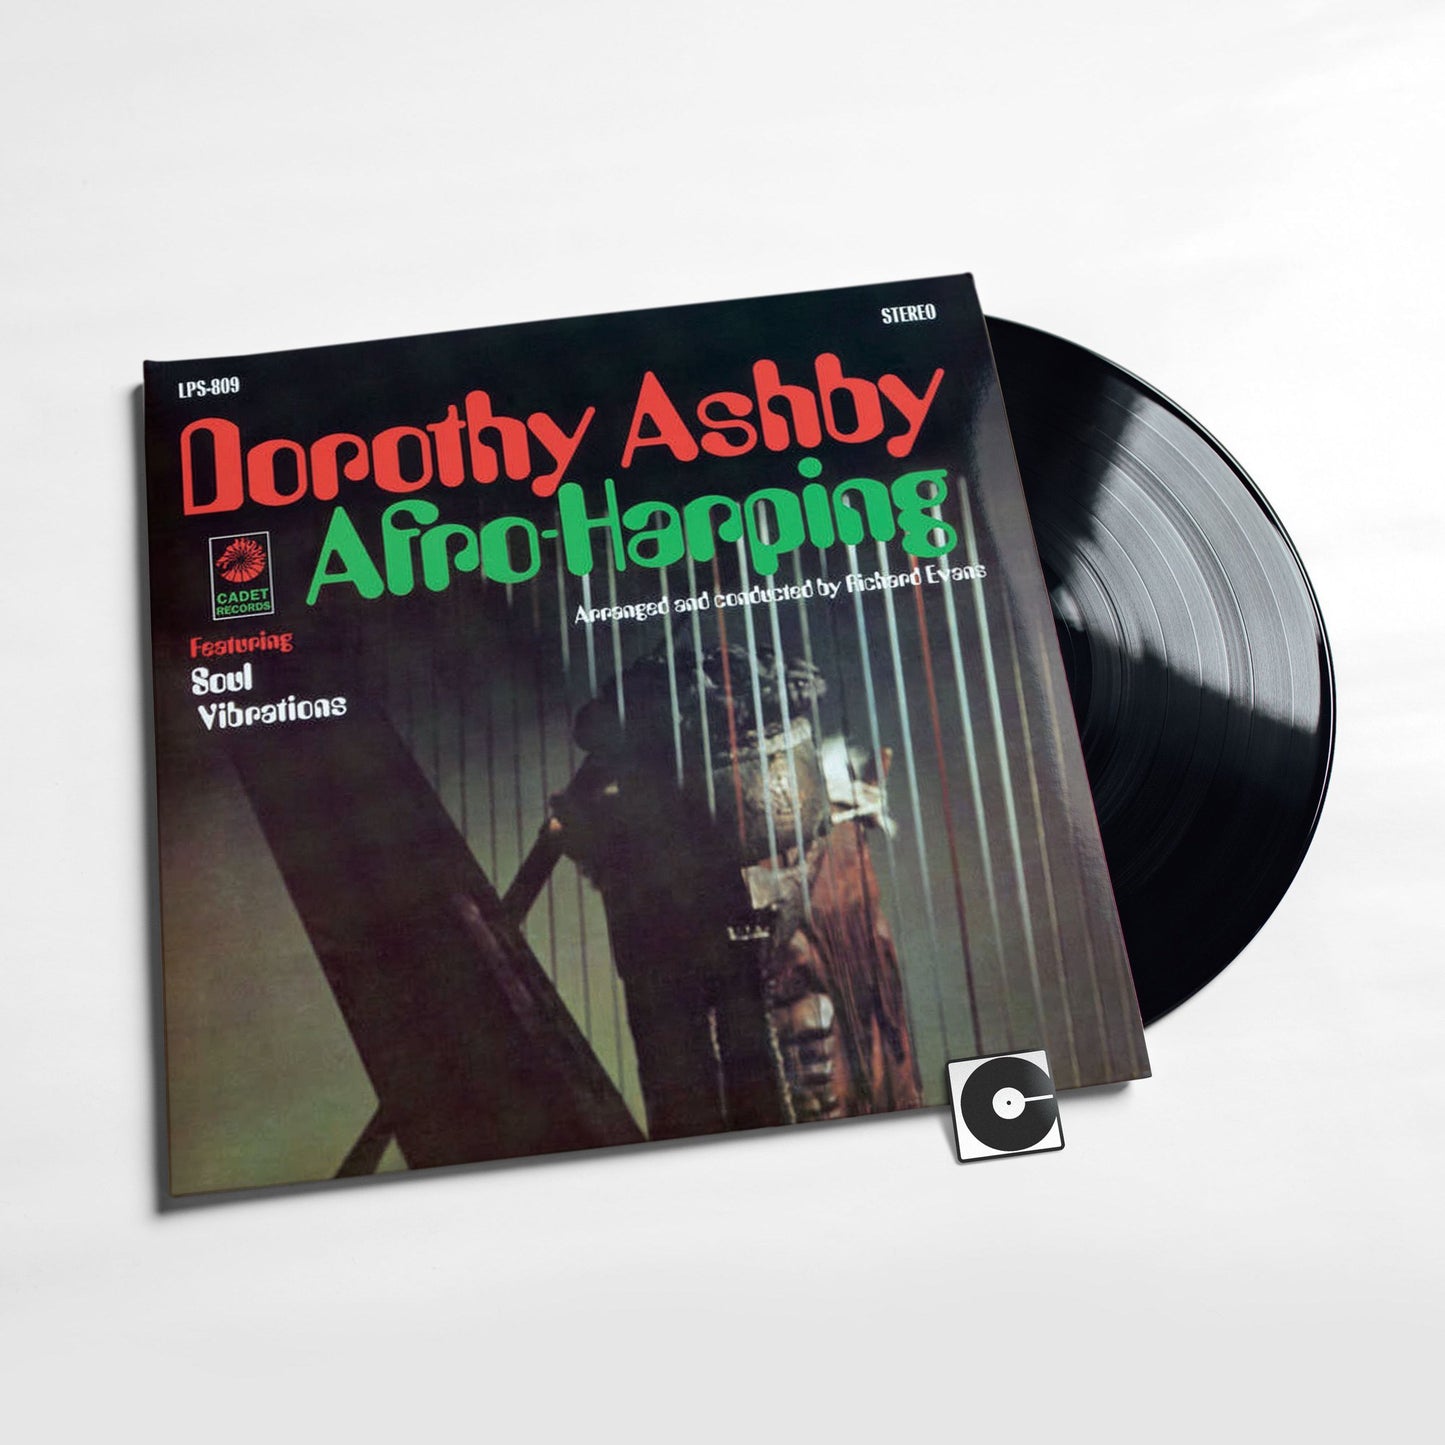 Dorothy Ashby - "Afro-Harping"